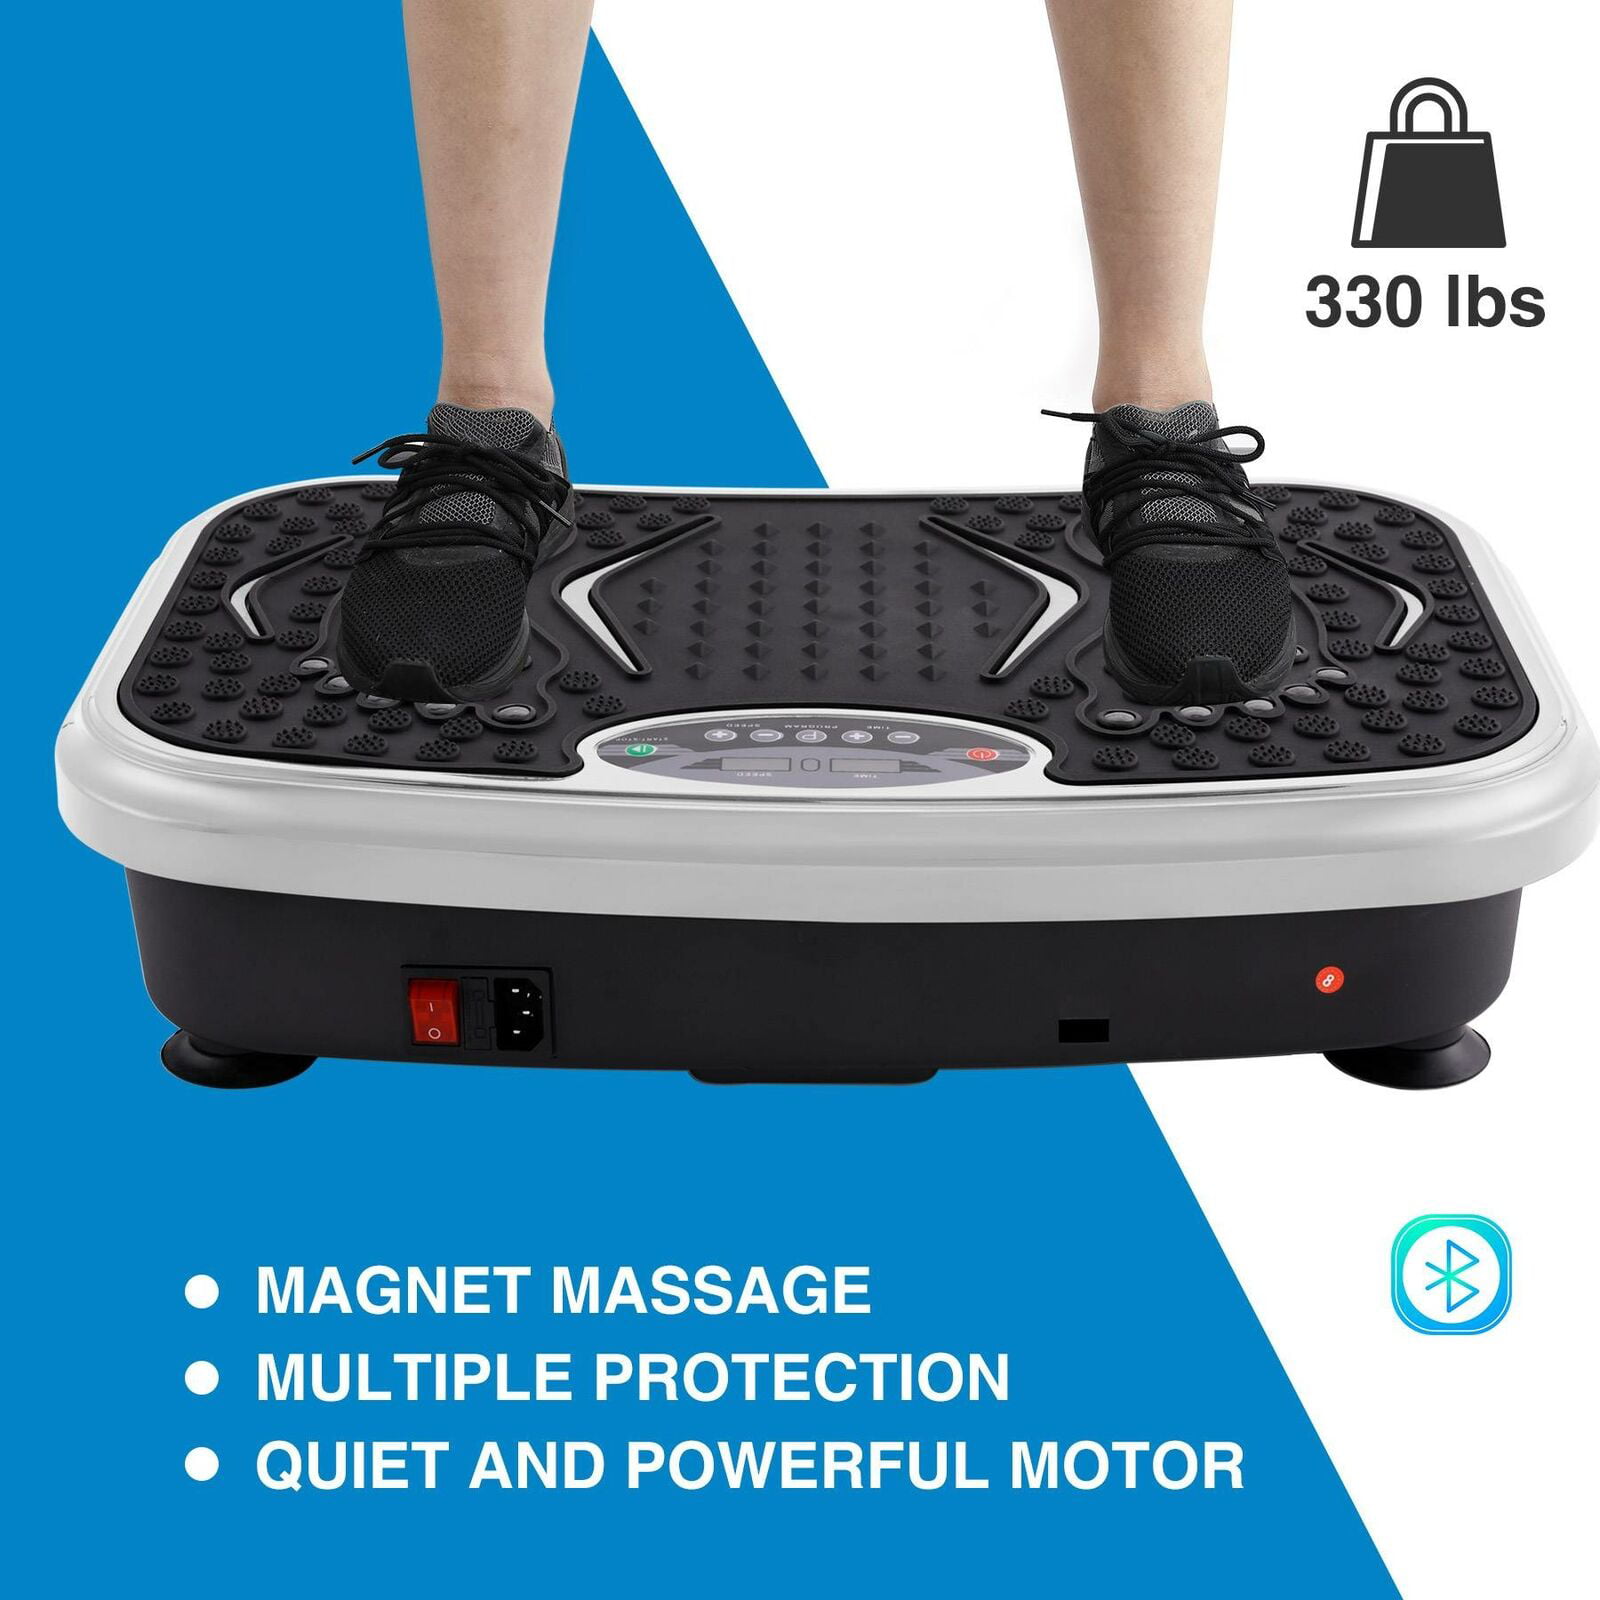 99 Levels Bigzzia Vibration Platform with Rope Skipping Whole Body Workout Vibration Fitness Platform Massage Machine for Home Training and Shaping